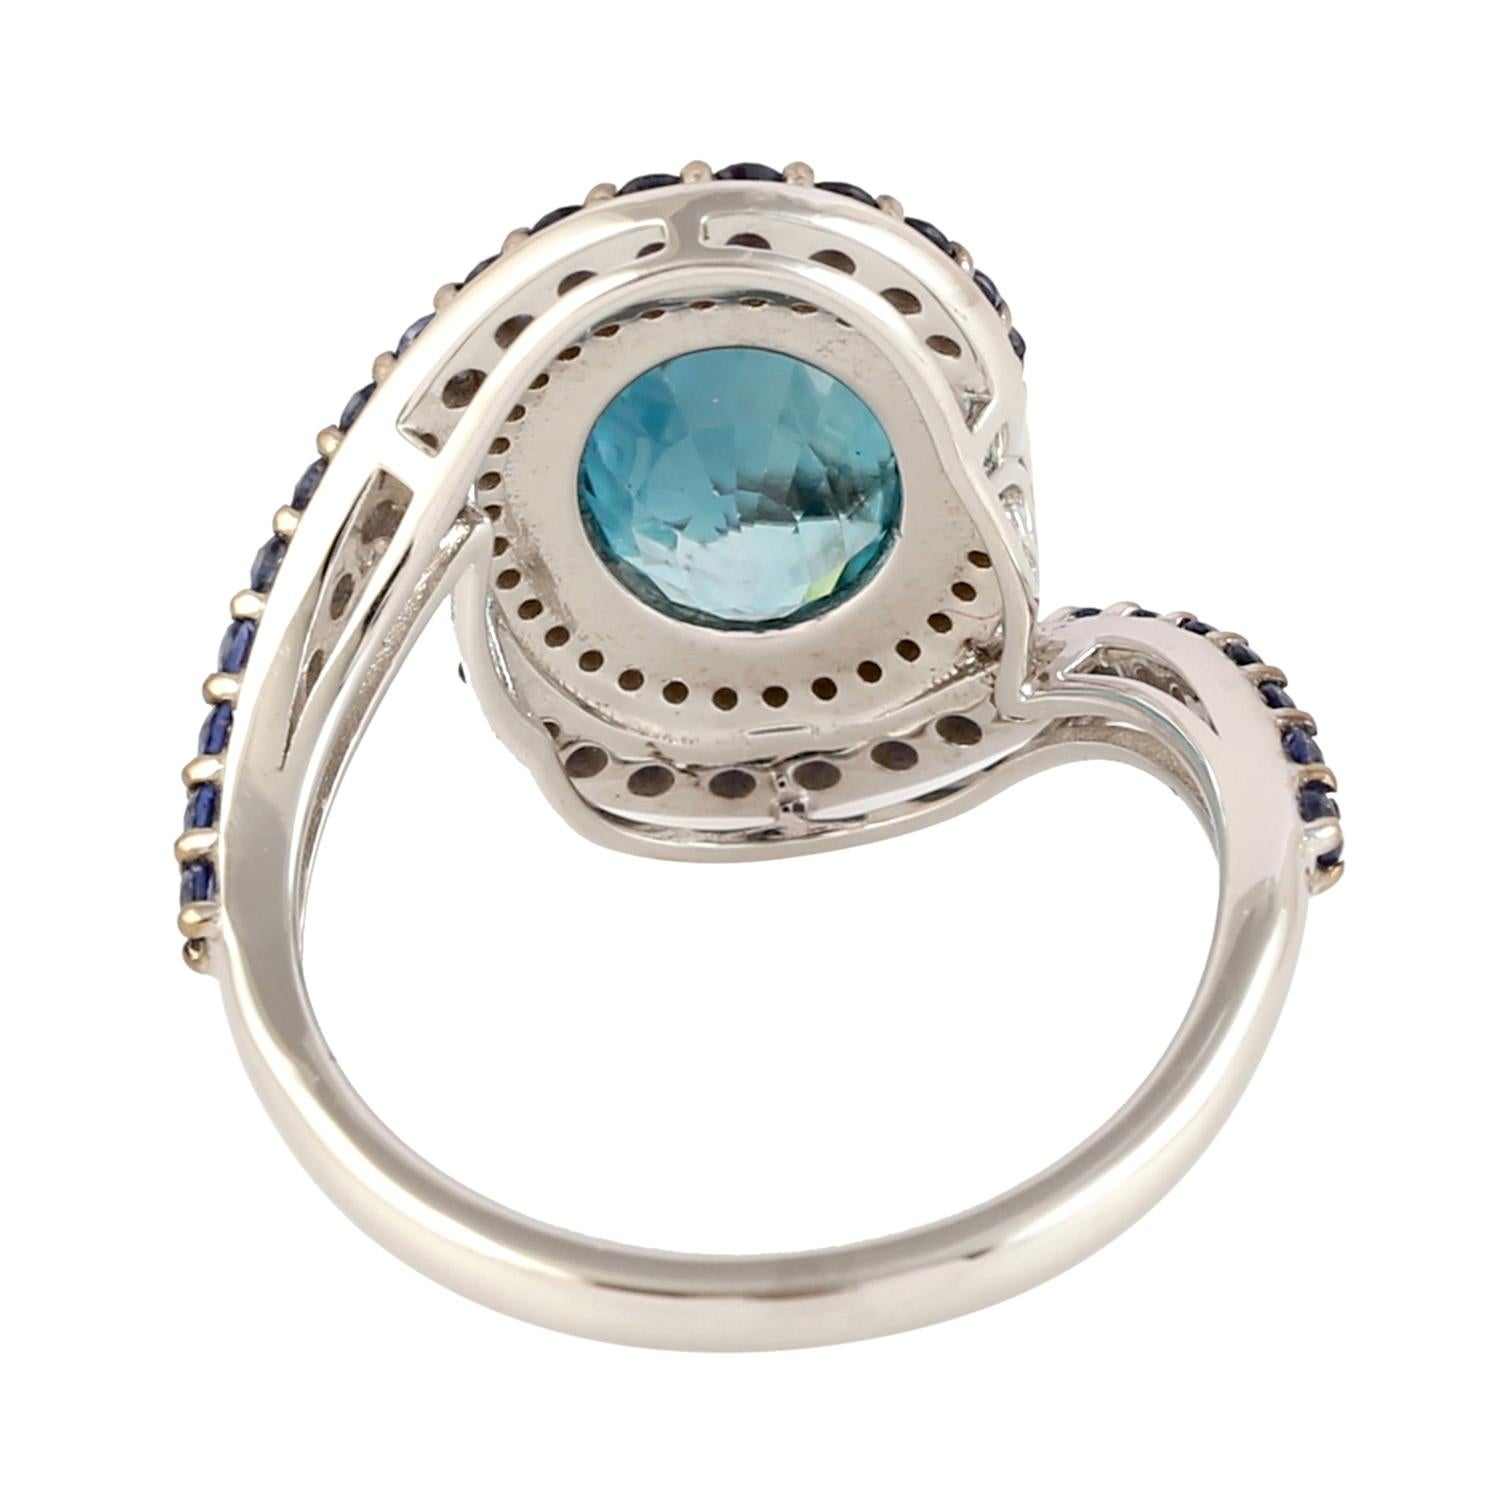 Mixed Cut Blue Zircon & Sapphire Ring With Diamonds Made In 18k Gold For Sale